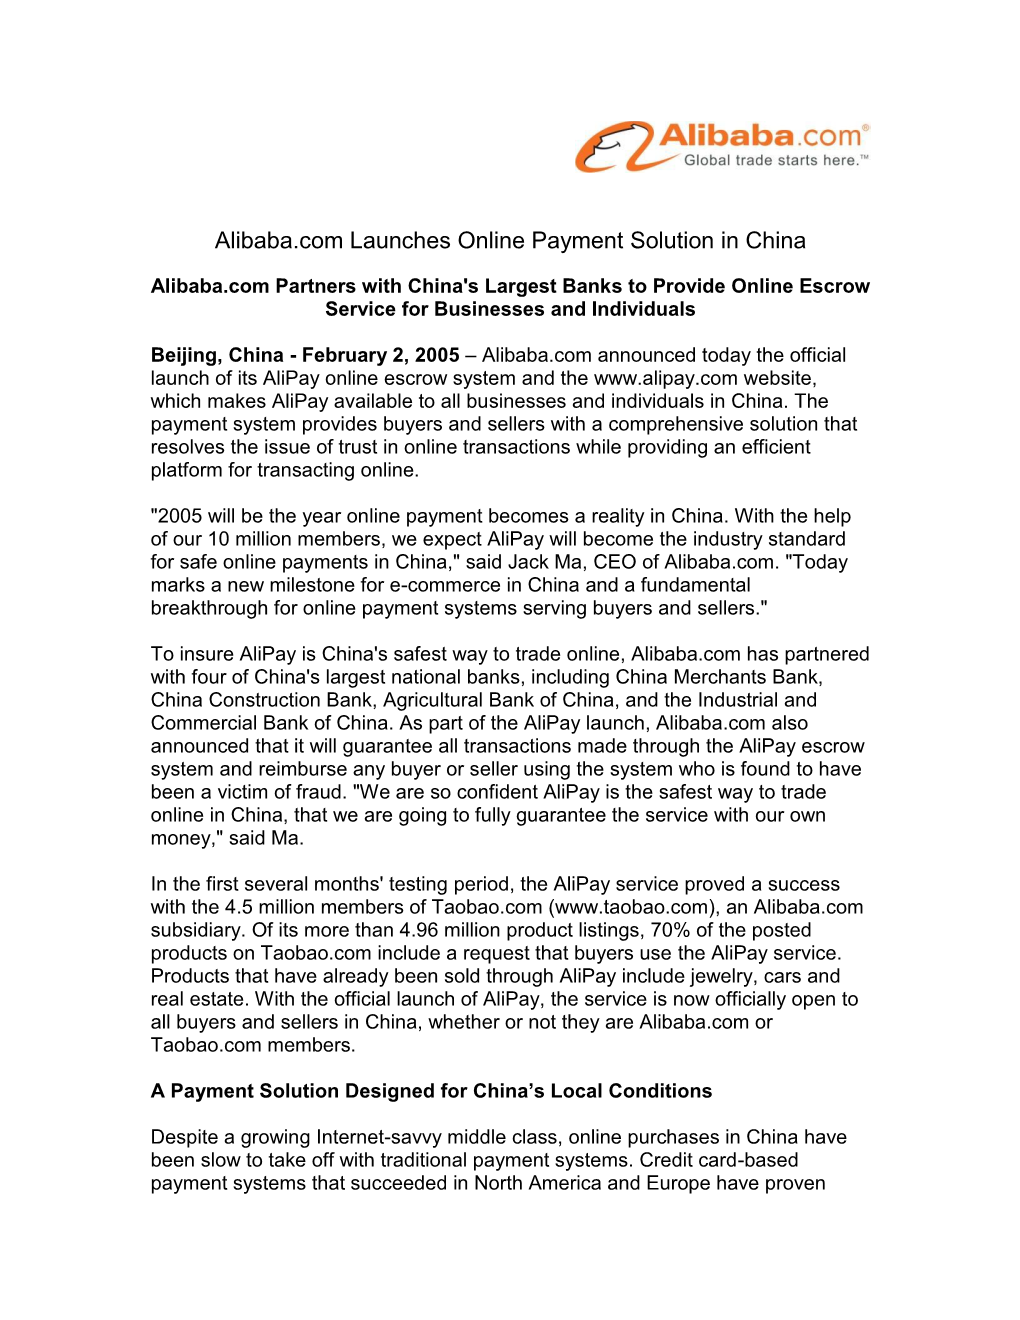 (2005), 'Alibaba.Com Launches Online Payment Solutions in China'